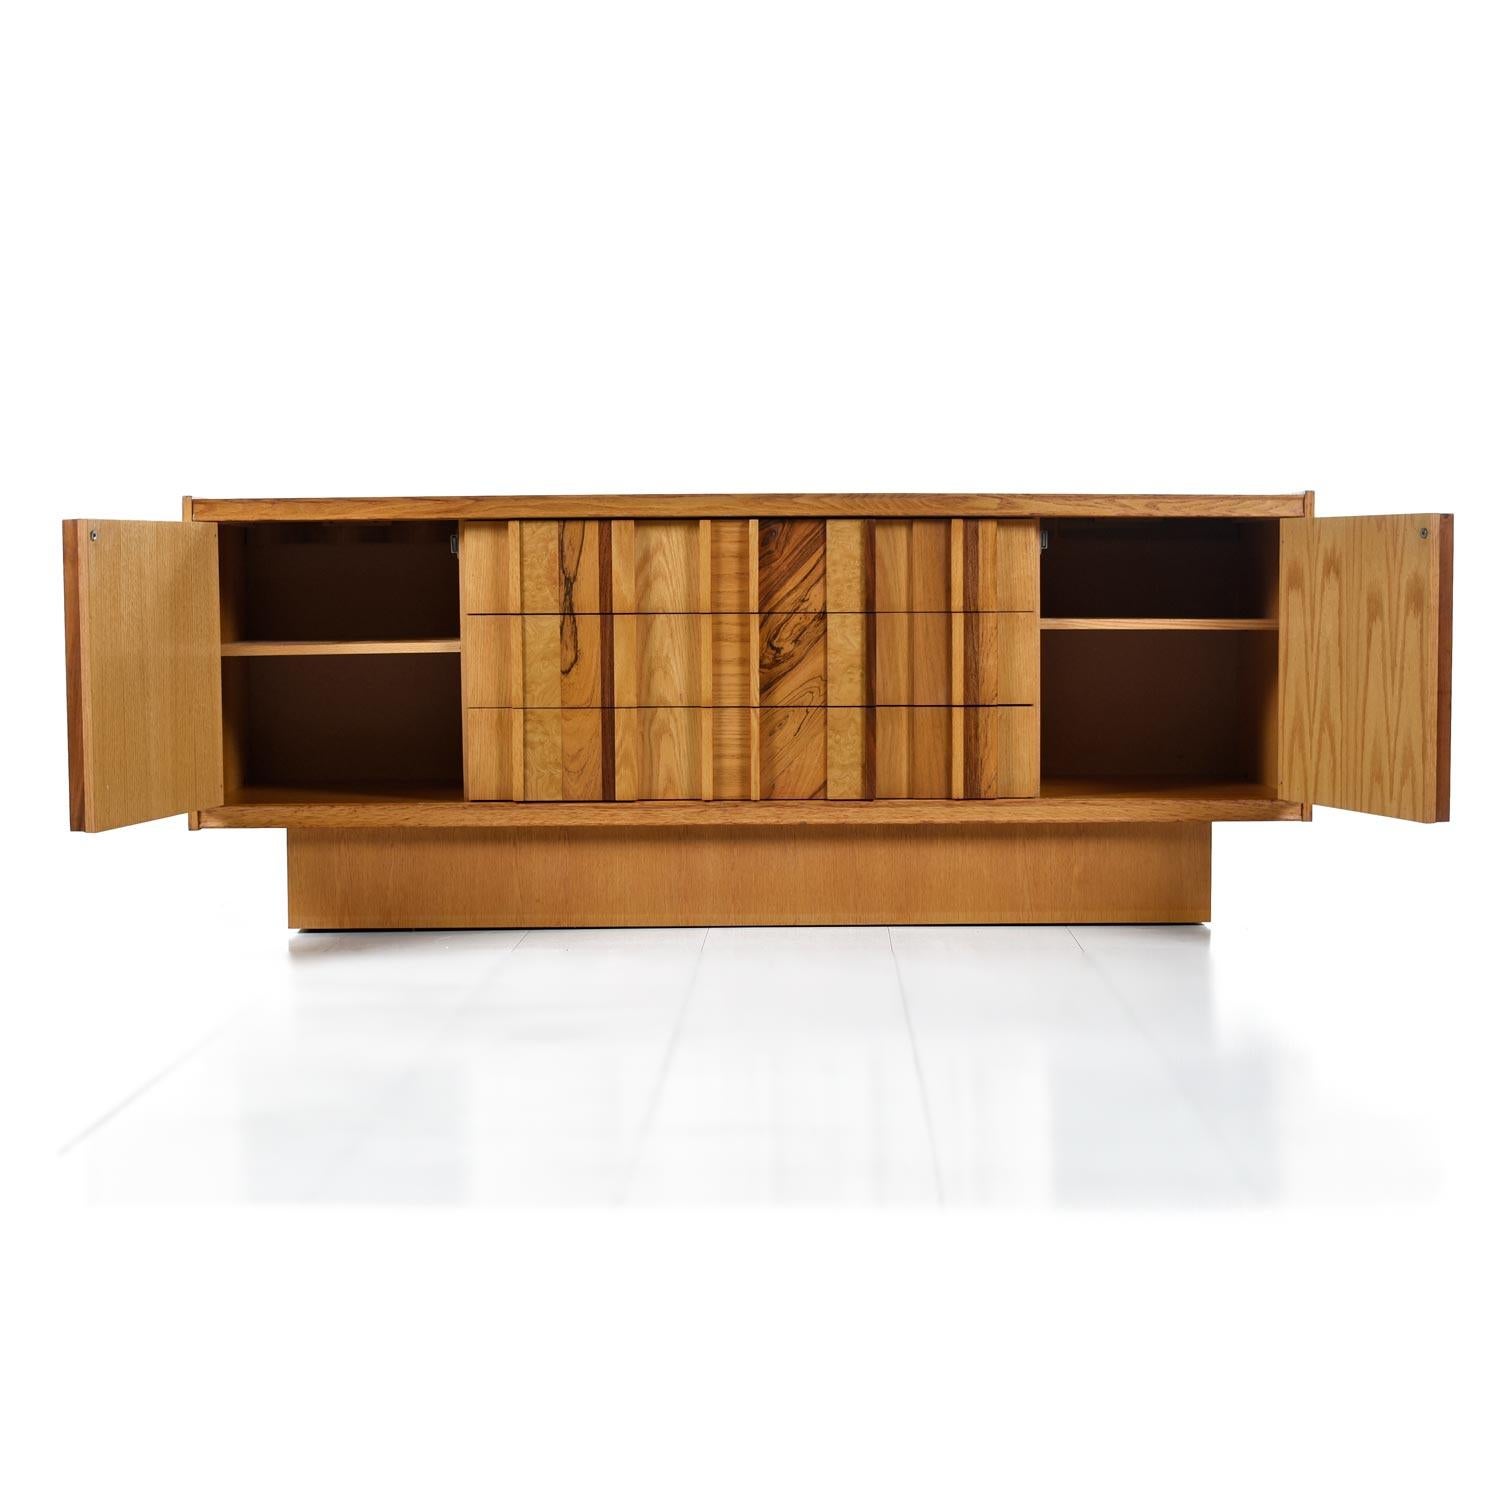 This stunning Brutalist credenza use several species of wood to create a truly unique look. The magpie assortment of veneers include maple, oak, burl wood, rosewood and walnut. The main body of the piece is a honey colored maple, fitting for this